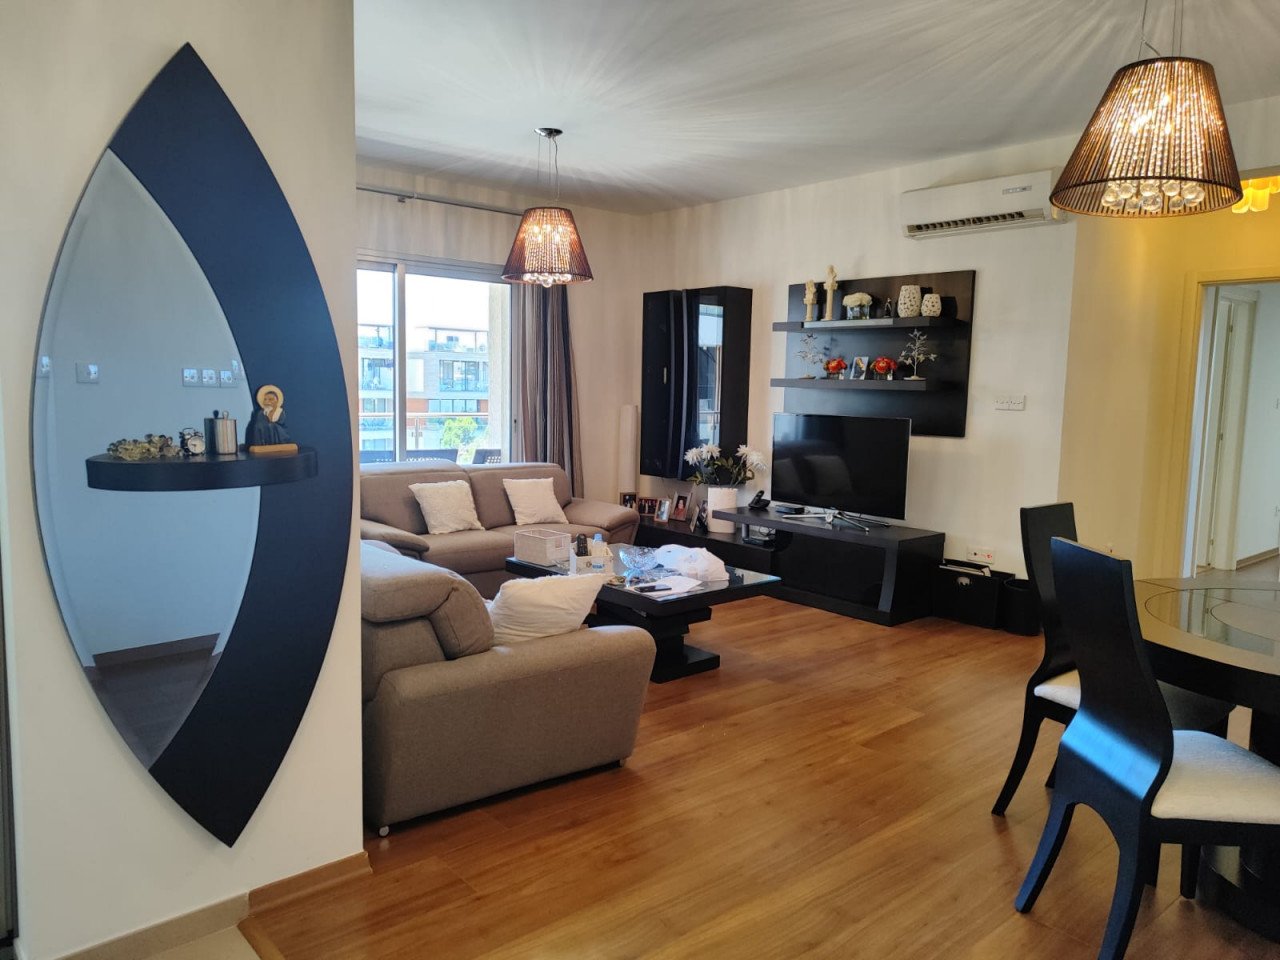 Property for Sale: Apartment (Flat) in Agia Zoni, Limassol  | Key Realtor Cyprus